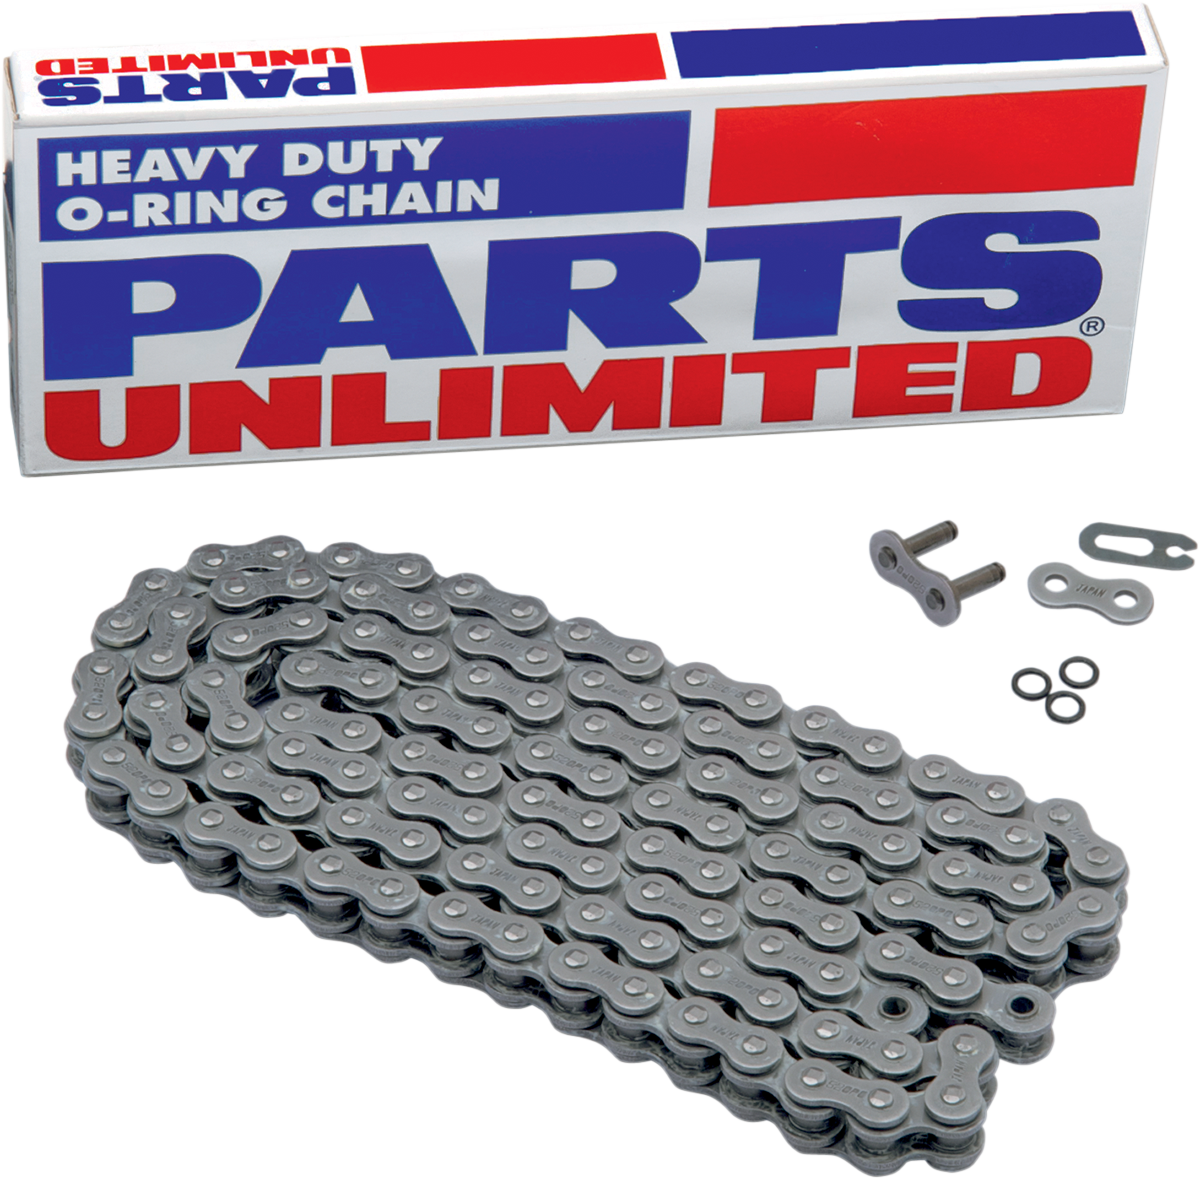 PARTS UNLIMITED-CHAIN MOTORCYCLE CHAIN CHAIN PU 520 O-RING X 96L